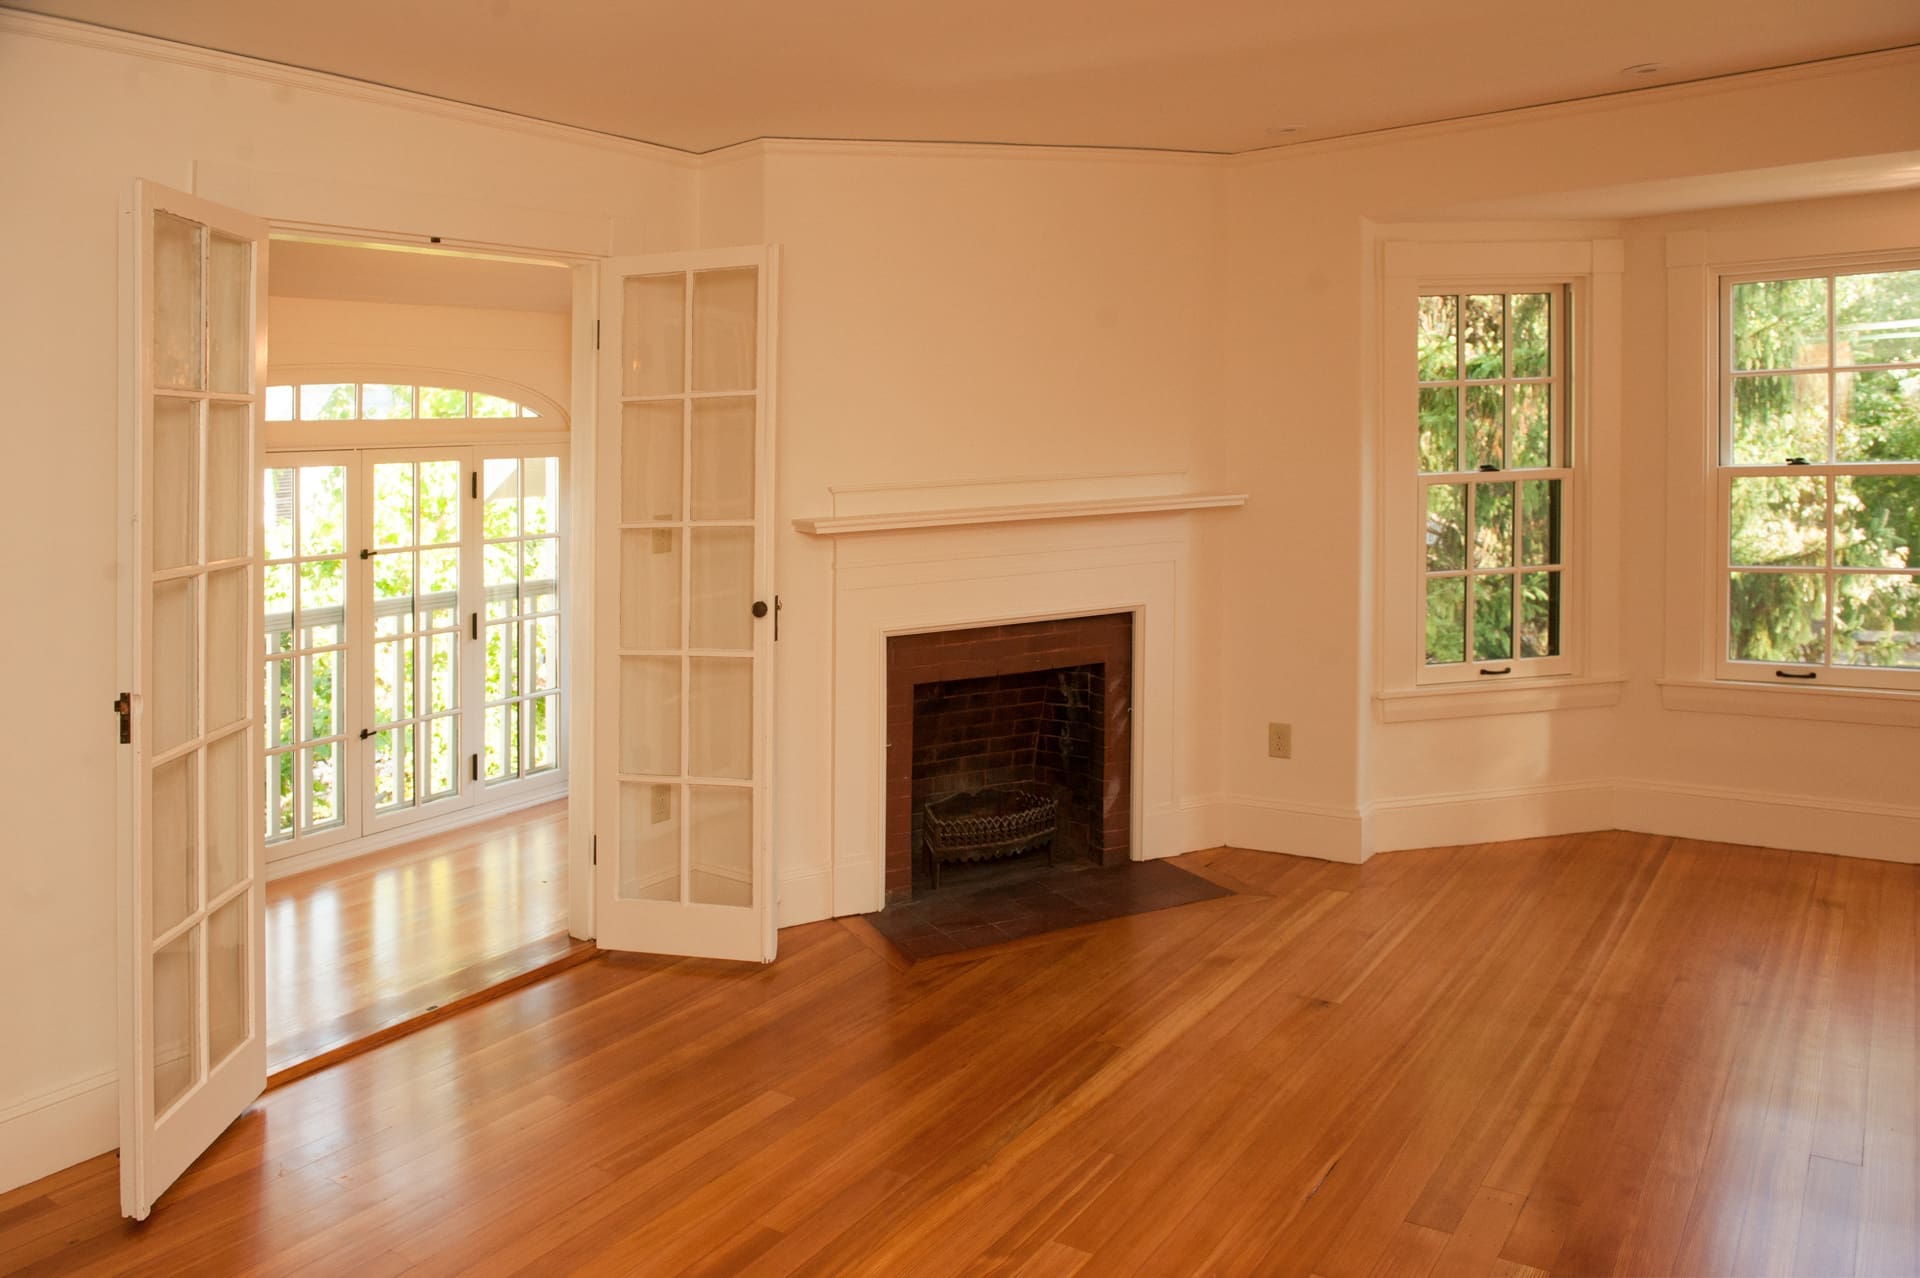 A photo of an empty room with white walls, windows, doors, and hardwood floors, with a dark brick fireplace.